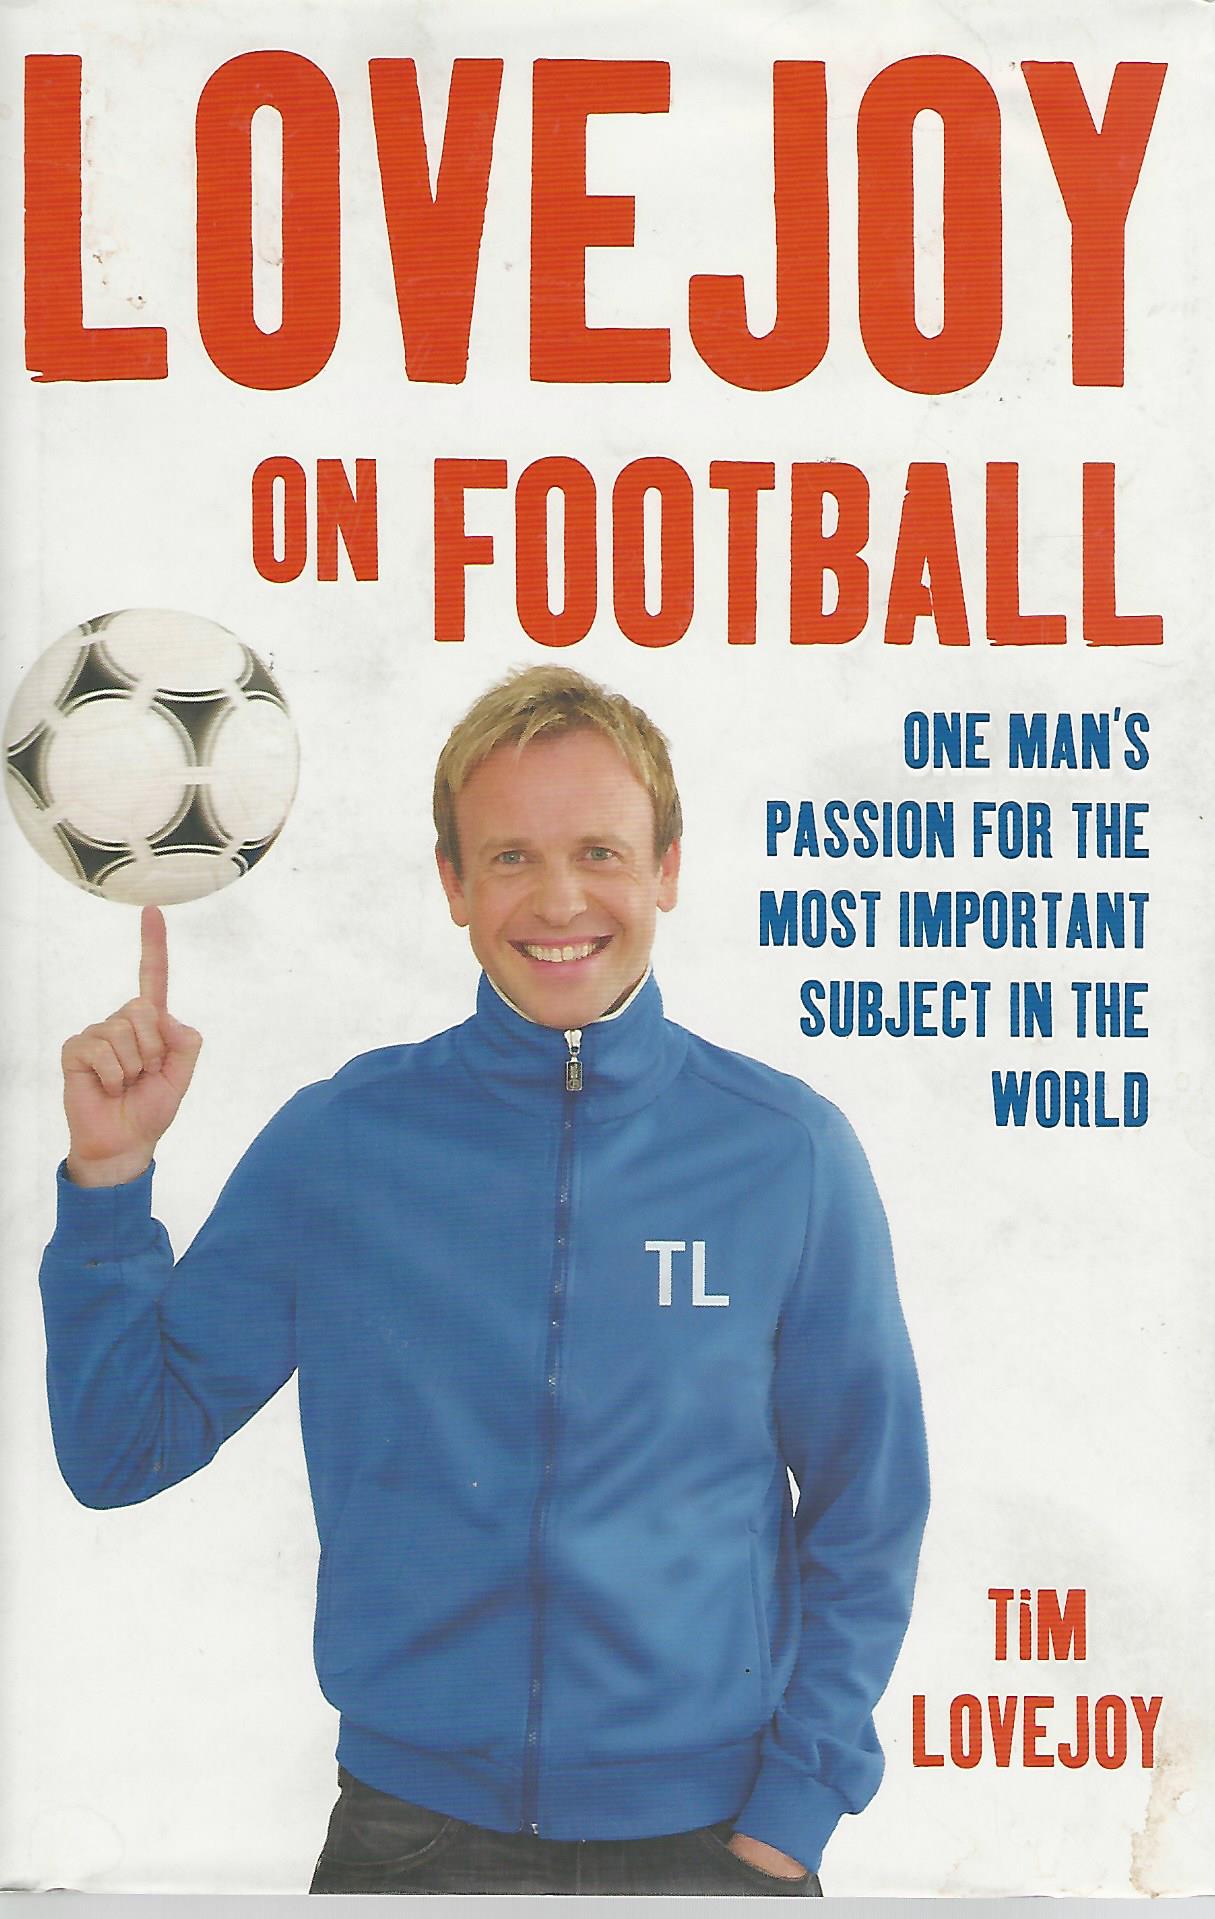 Lovejoy, Tim - Lovejoy on football -One man's passion for the most important subject in the world